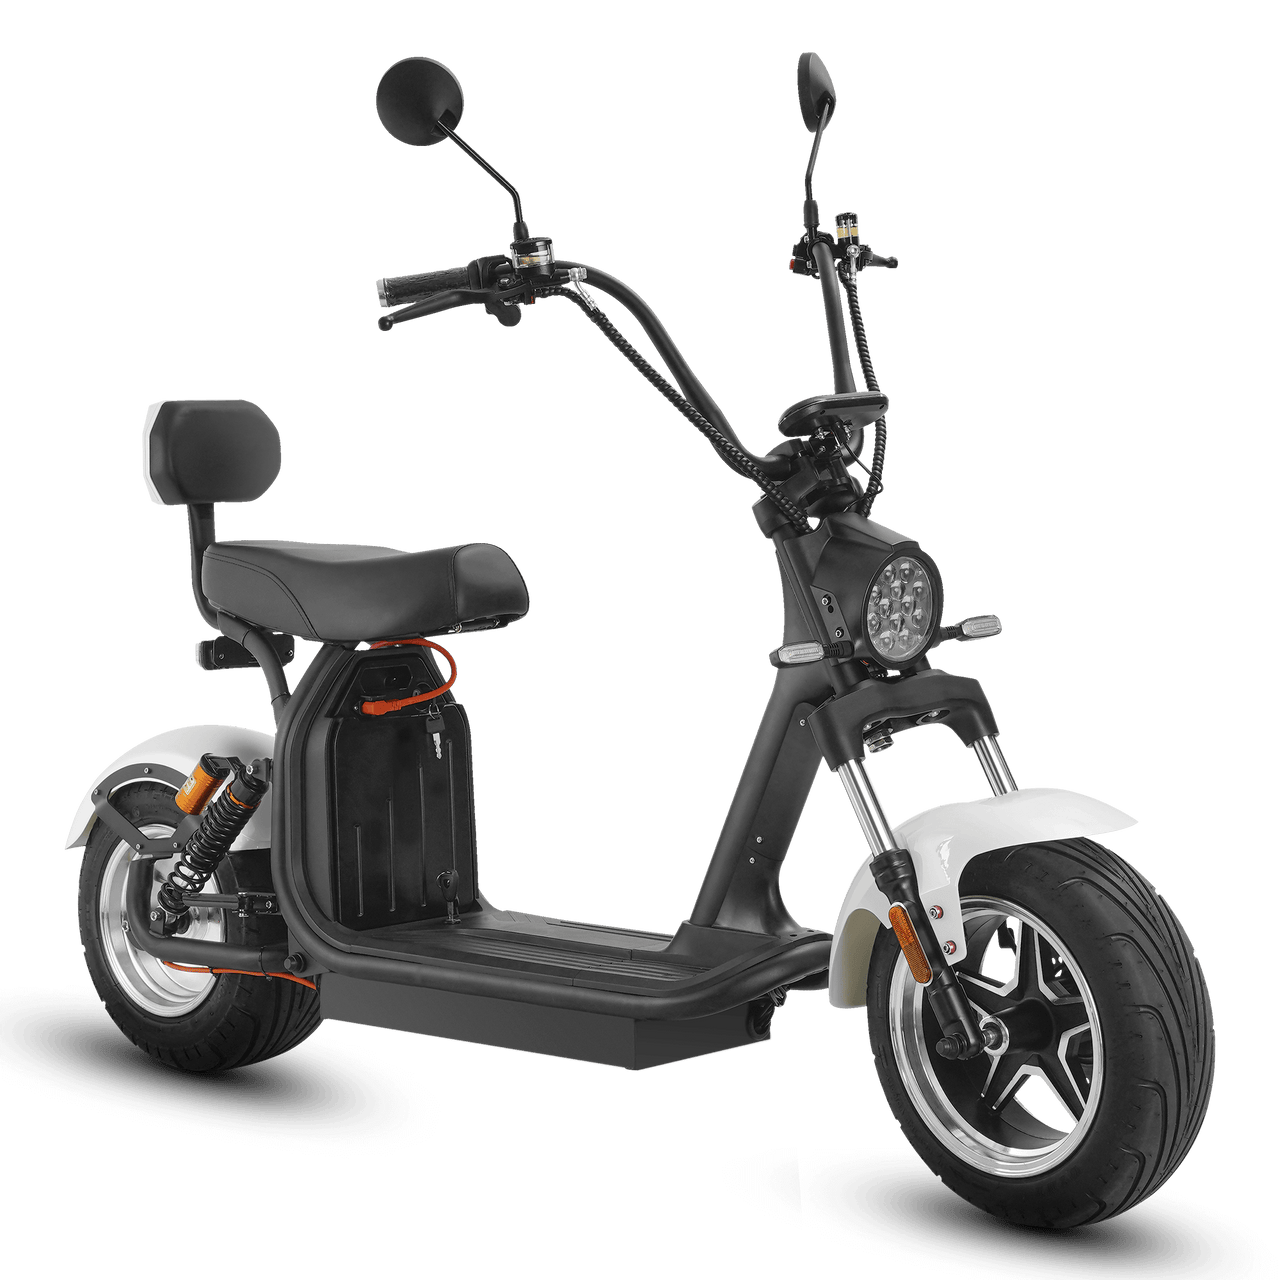 Eahora Electric Fat Tire Motorcycle - Best Motorcycle